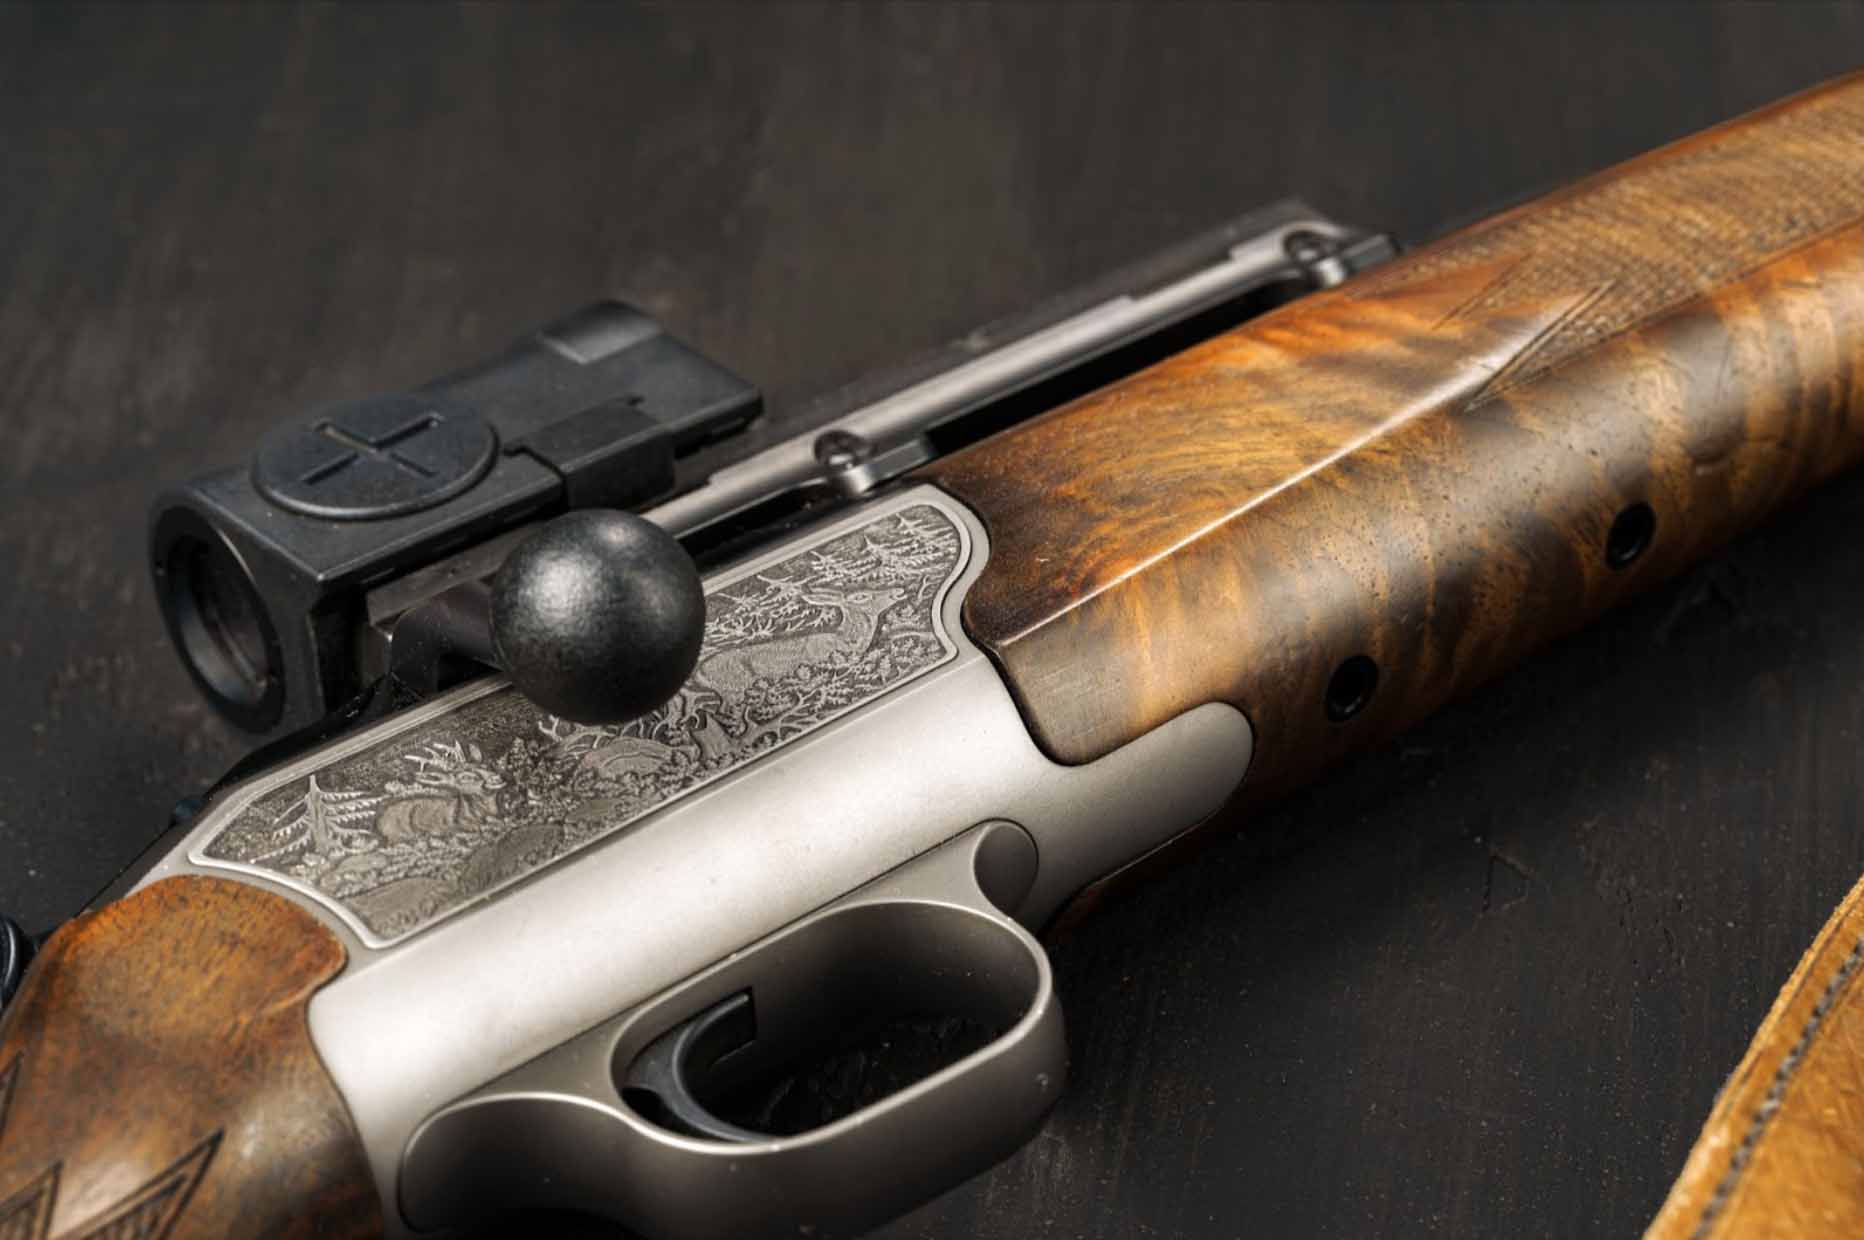 A close-up shot of a hunting rifle with a polished wooden stock and metal trigger, set against a black background for contrast.